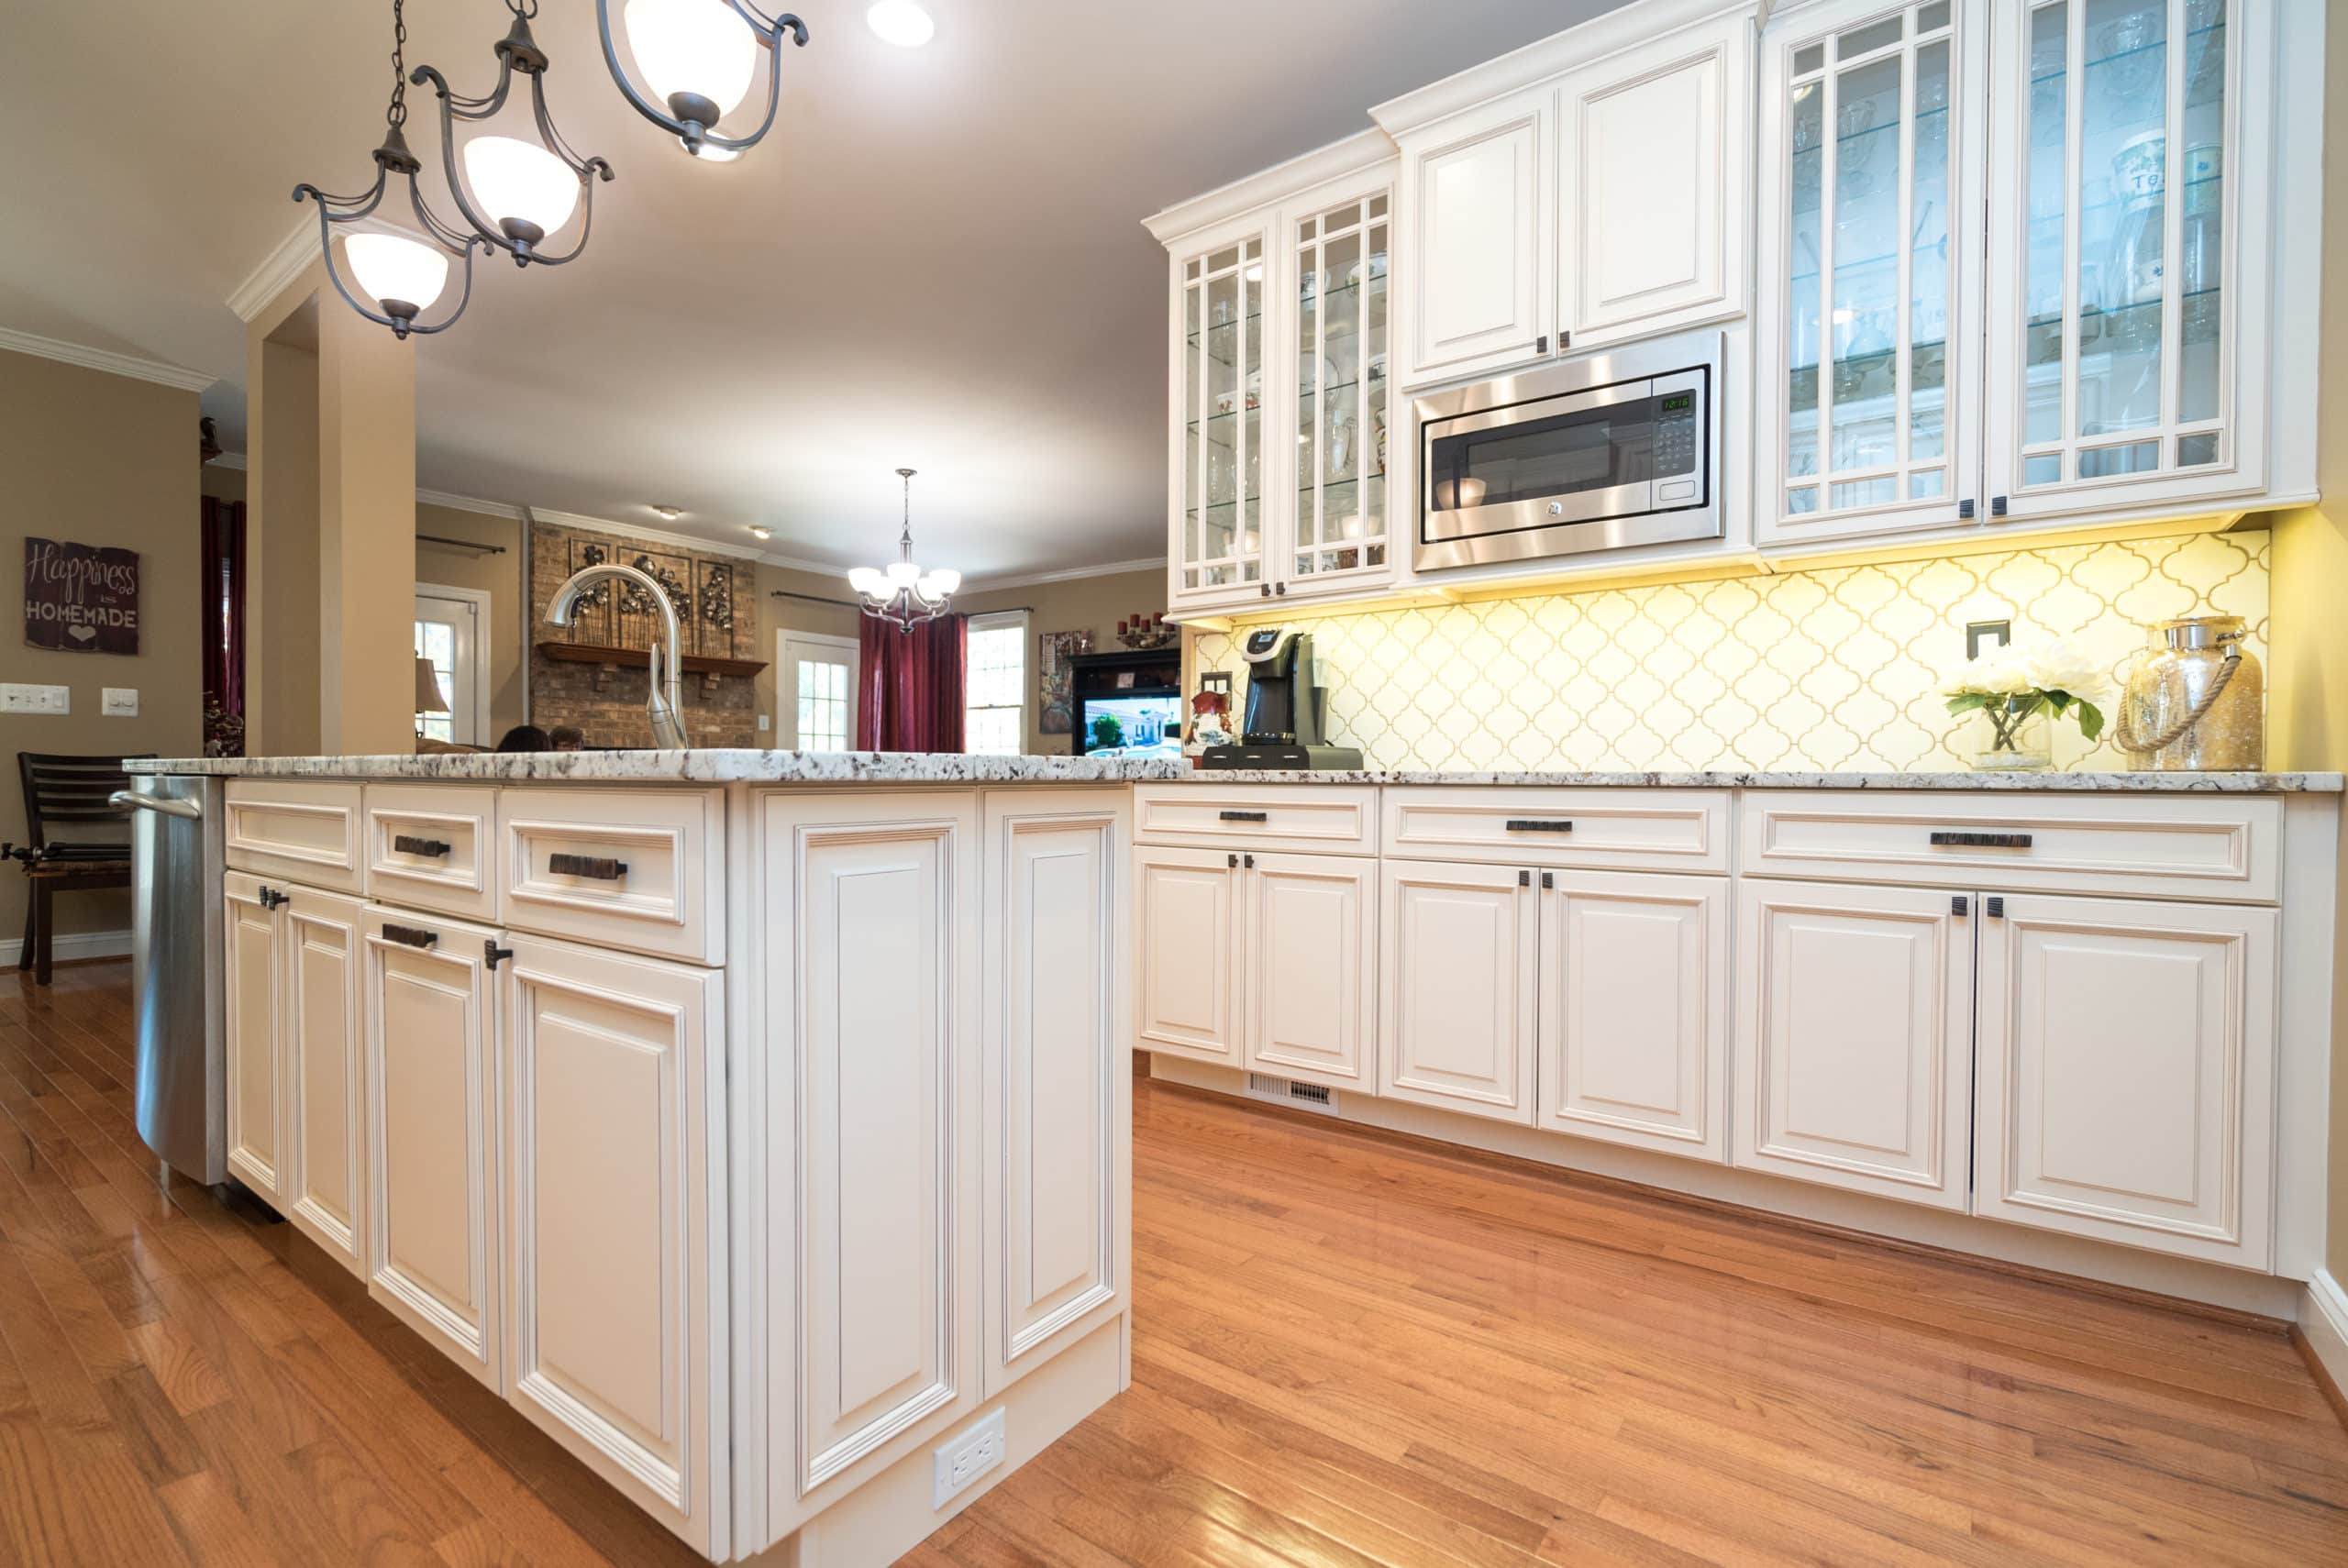  Kitchen  Cabinets Gallery USA  Cabinet  Store